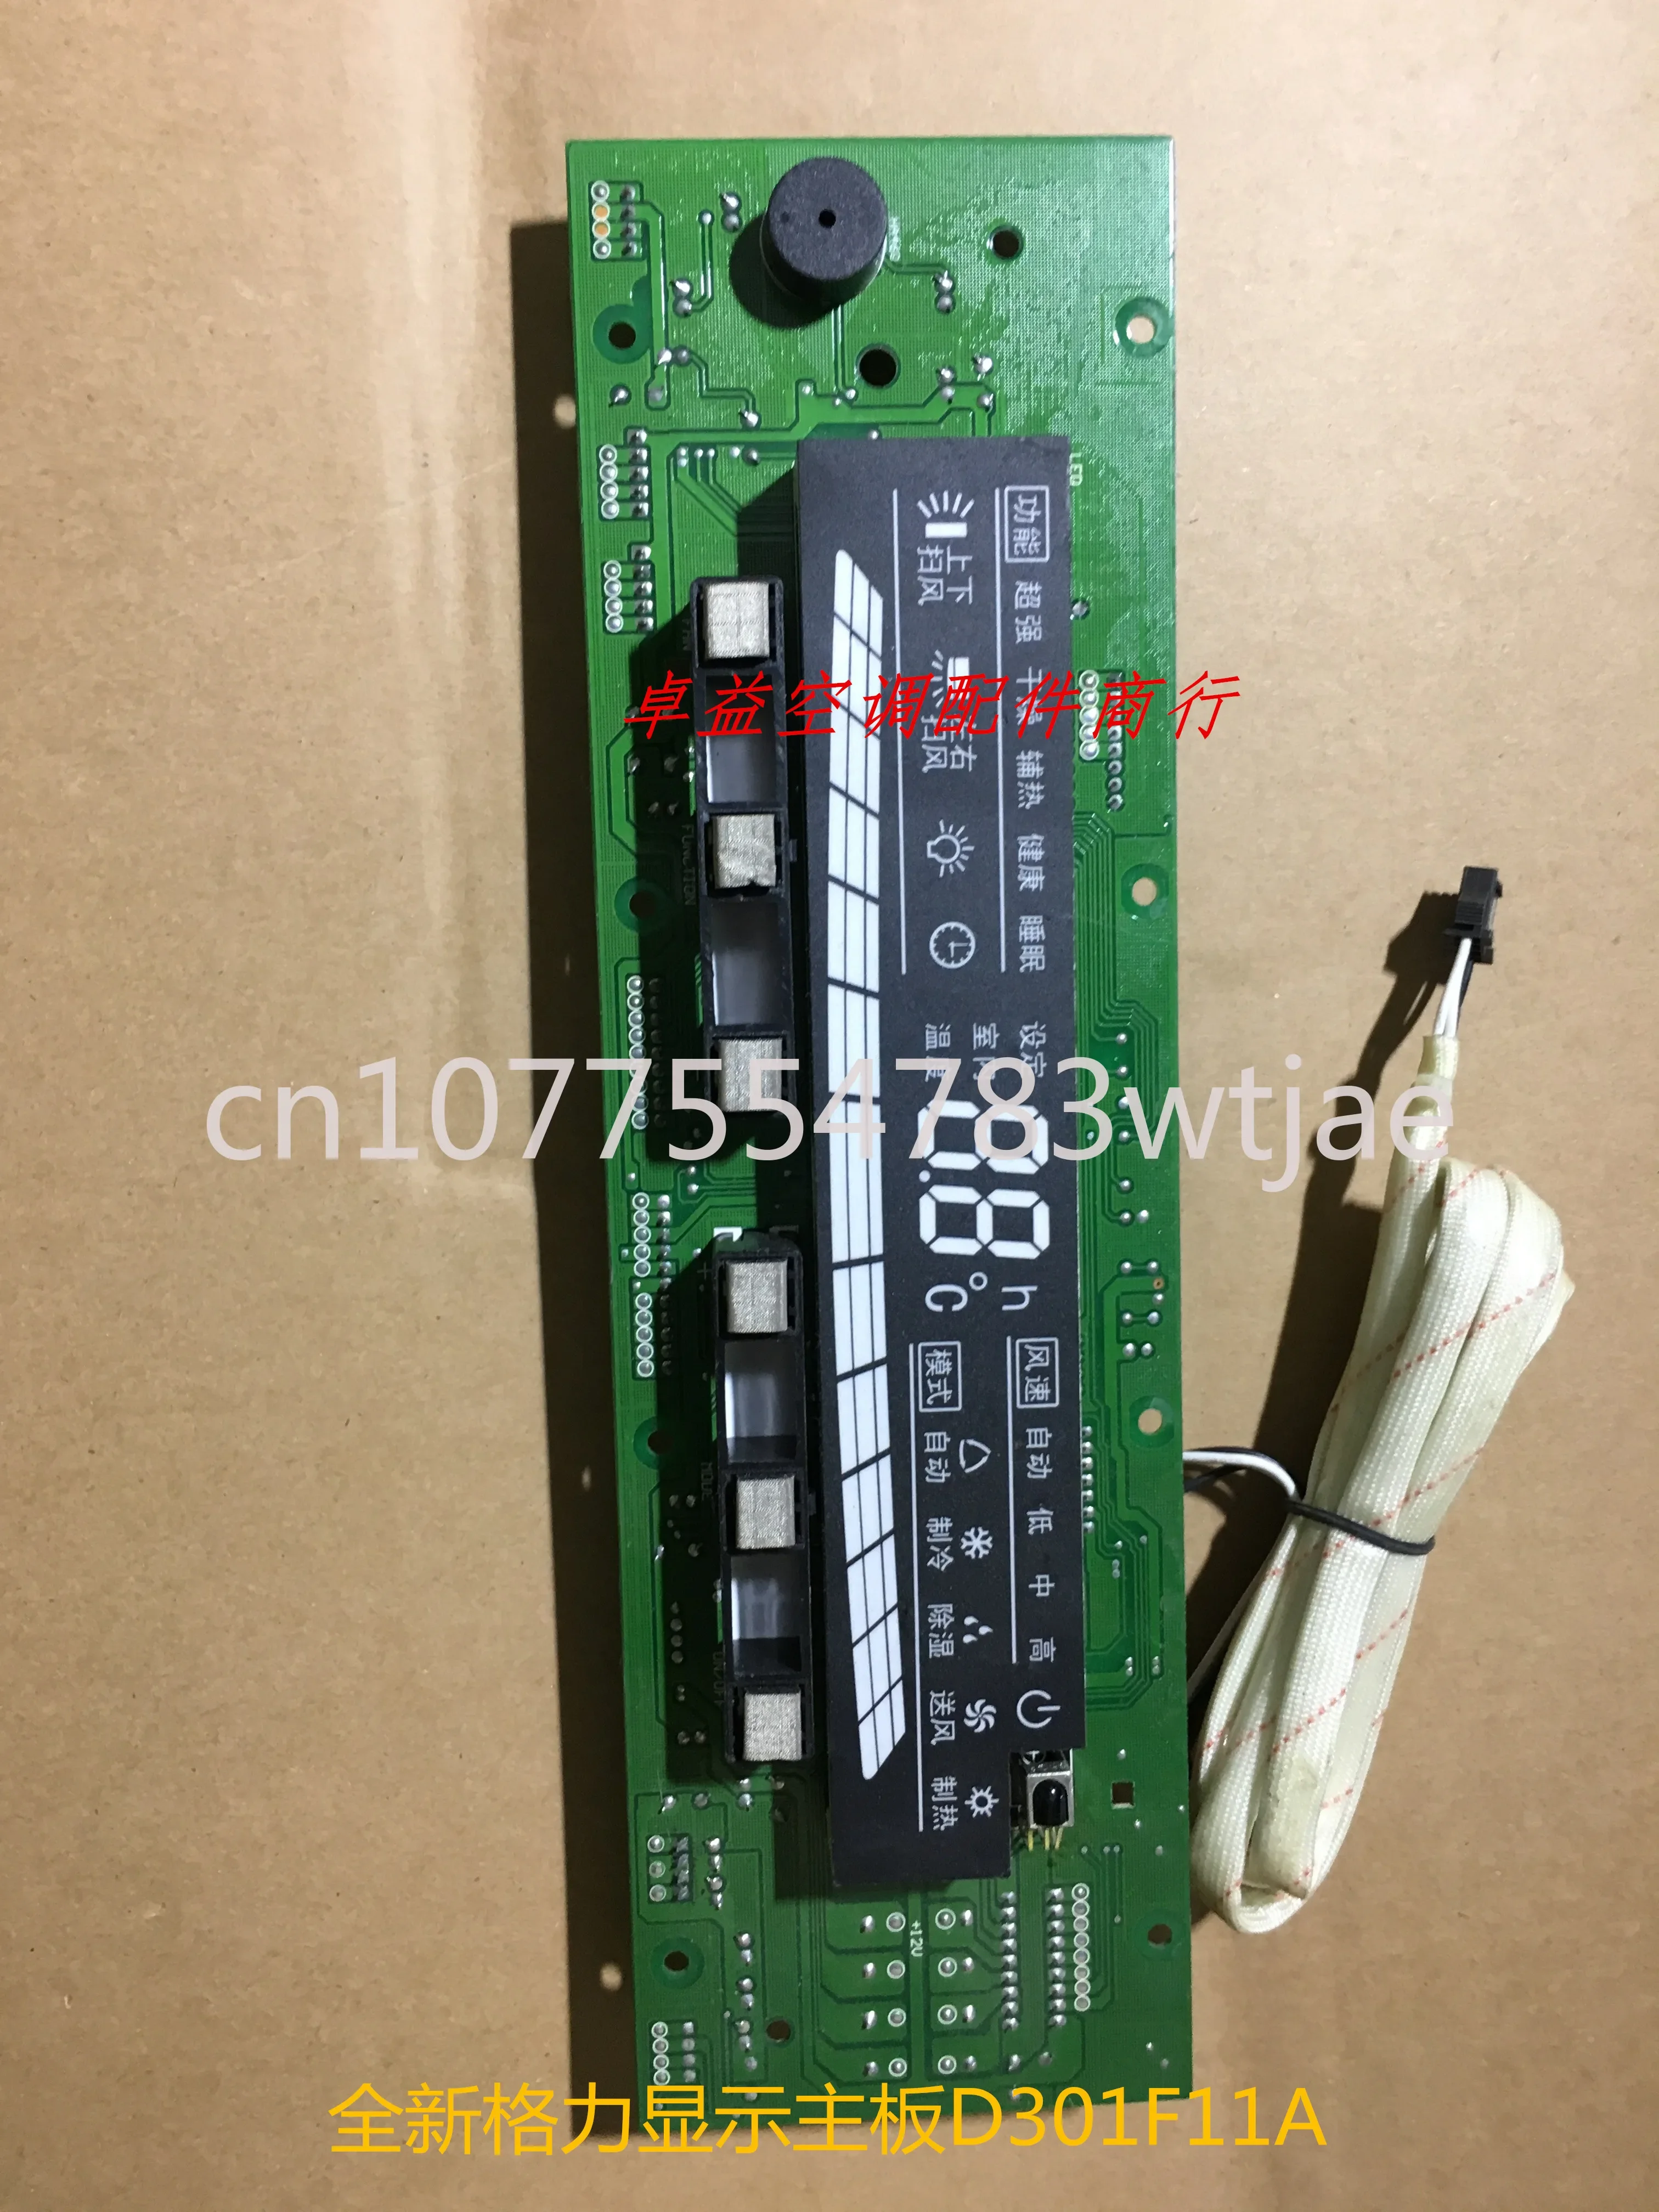 

Original brand new air conditioning accessories, cabinet display board D301F11A 30543125